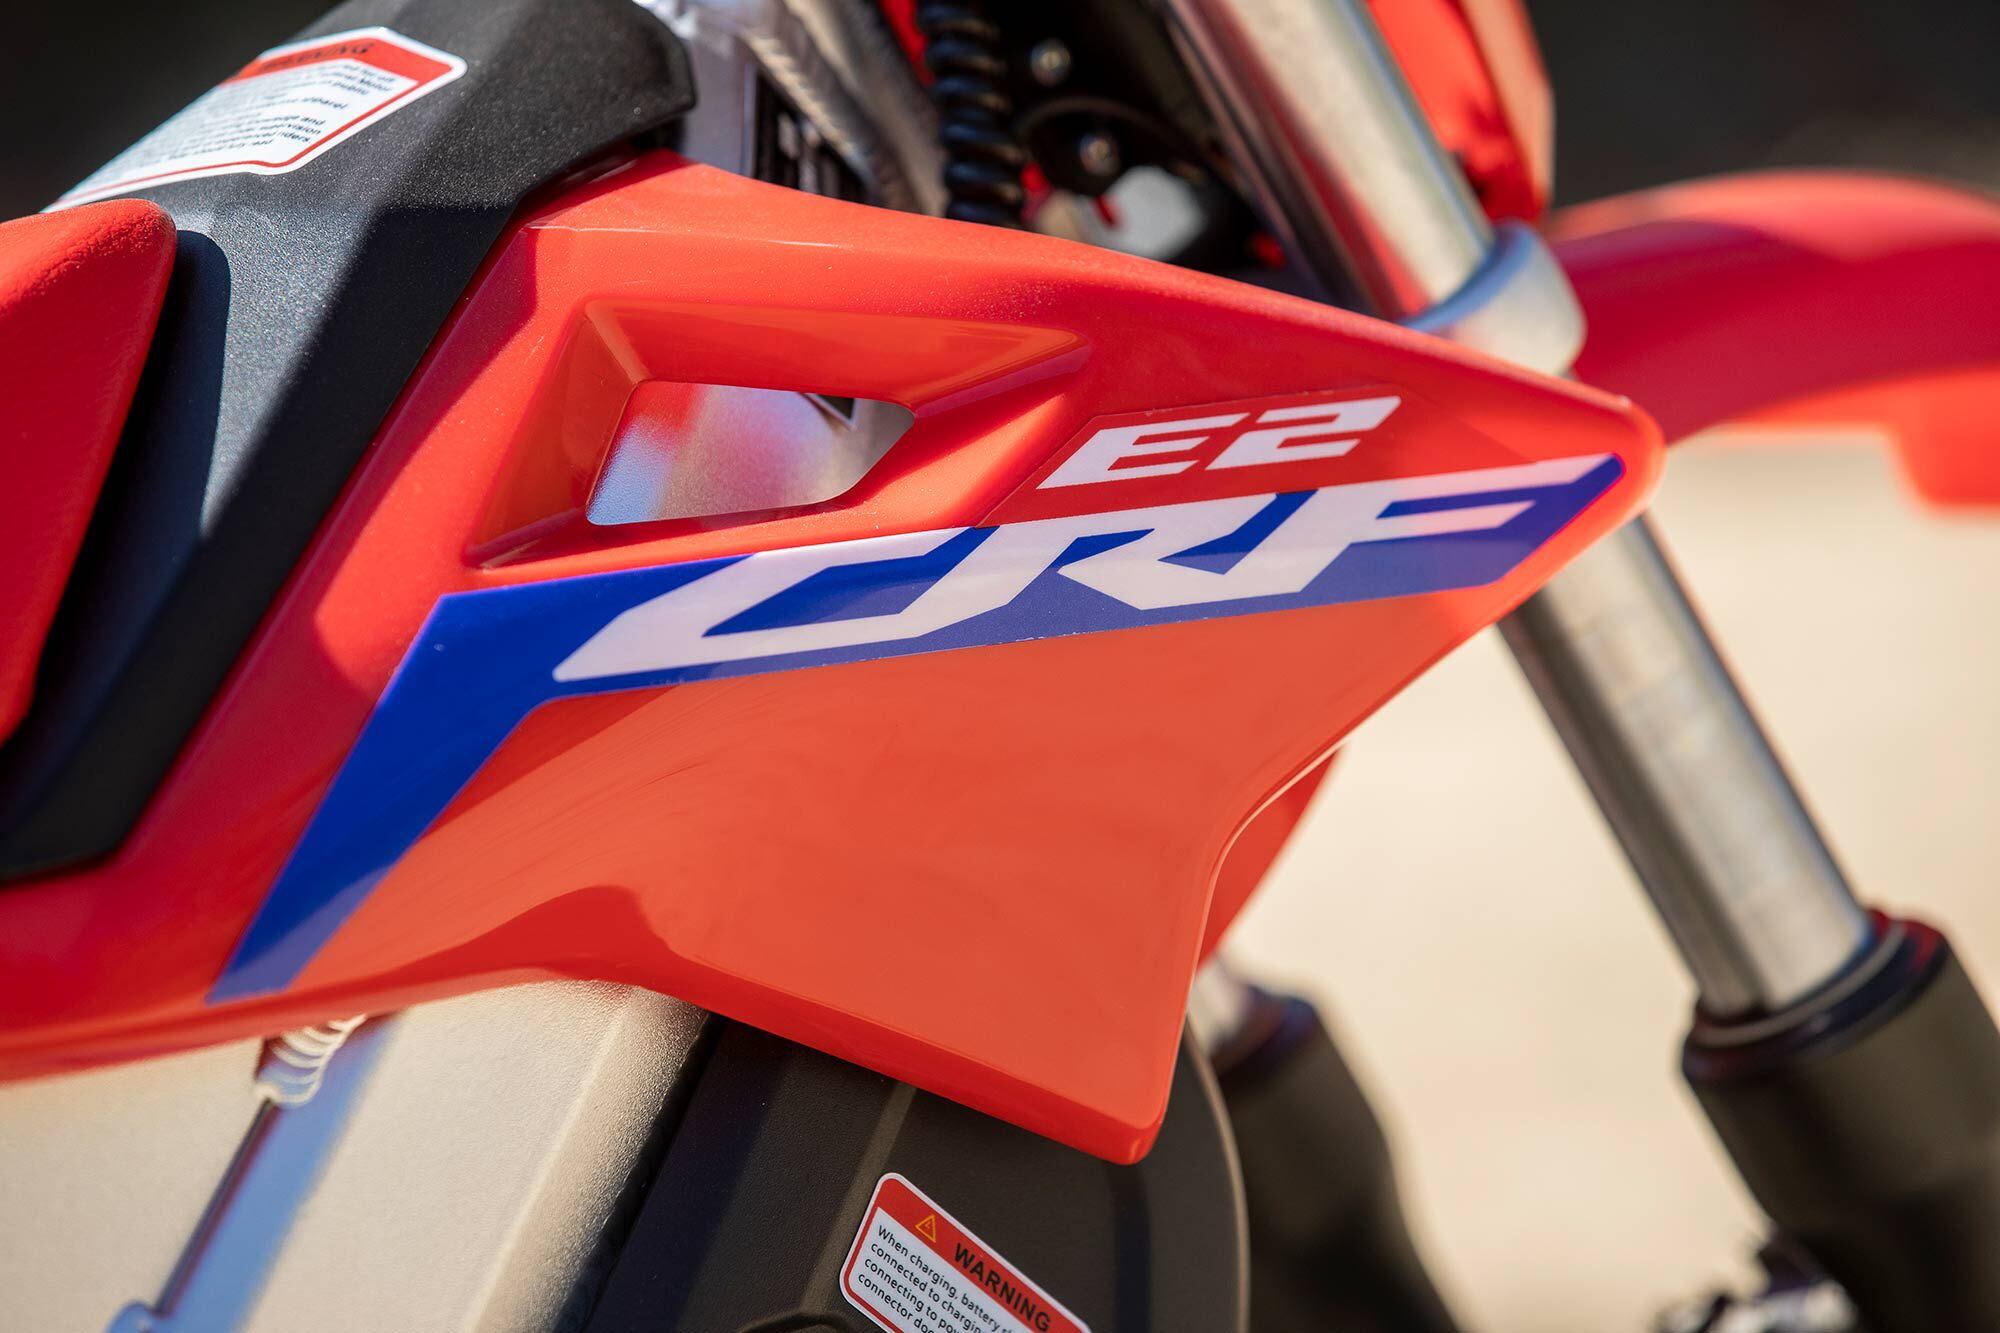 The electric CRF-E2 doesn’t exactly “need” radiator shrouds, and yet how can it look moto without them?!